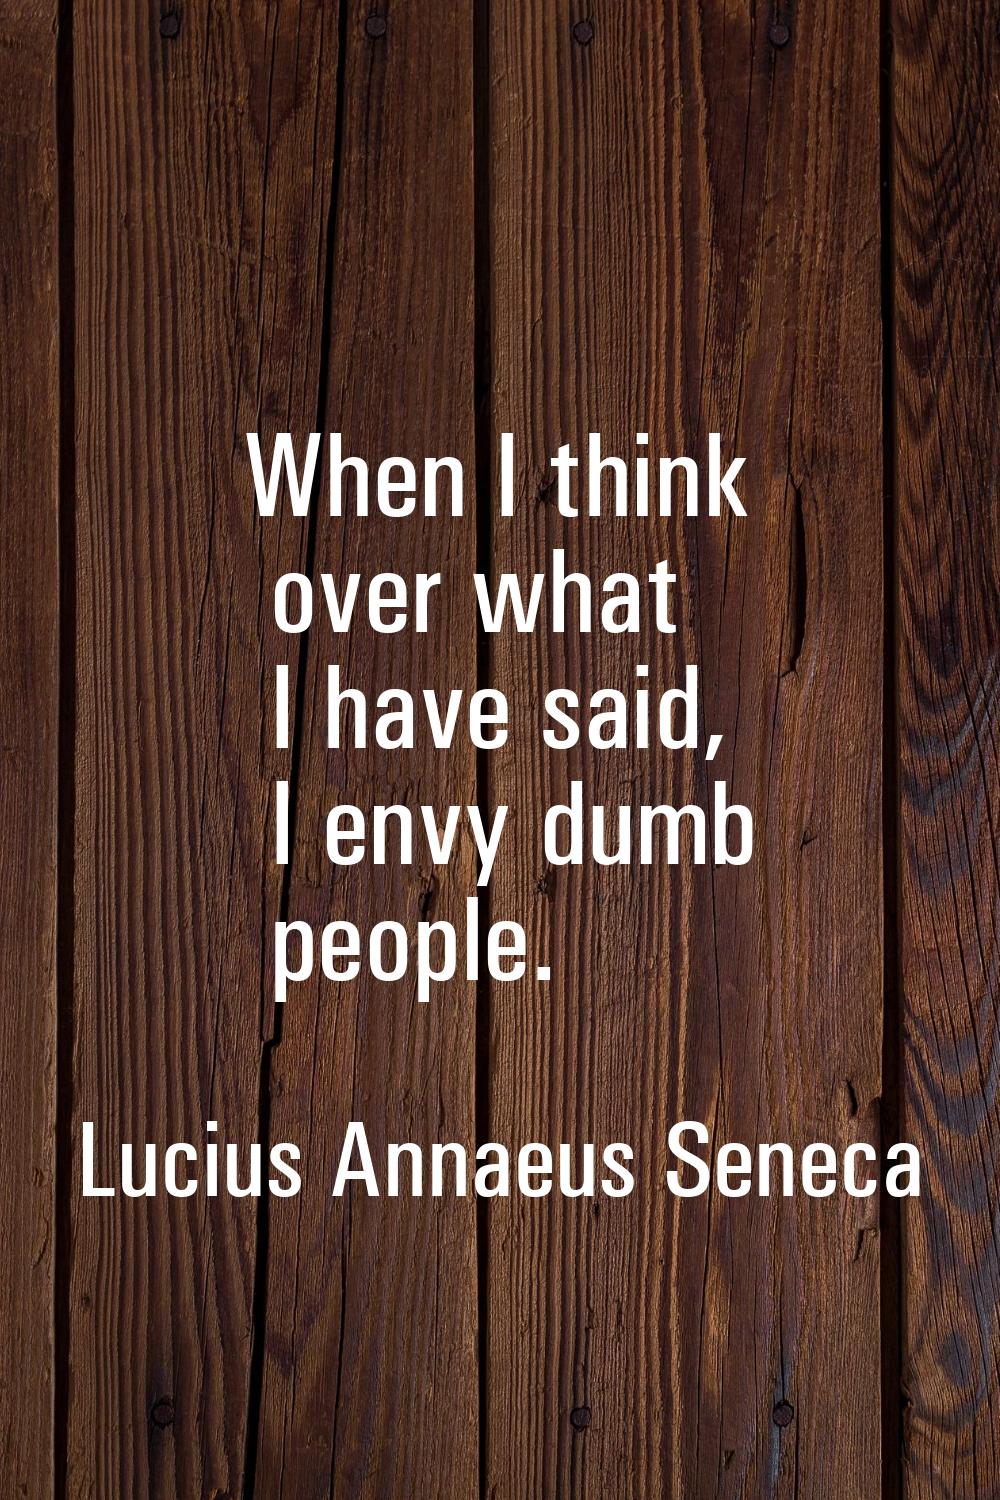 When I think over what I have said, I envy dumb people.